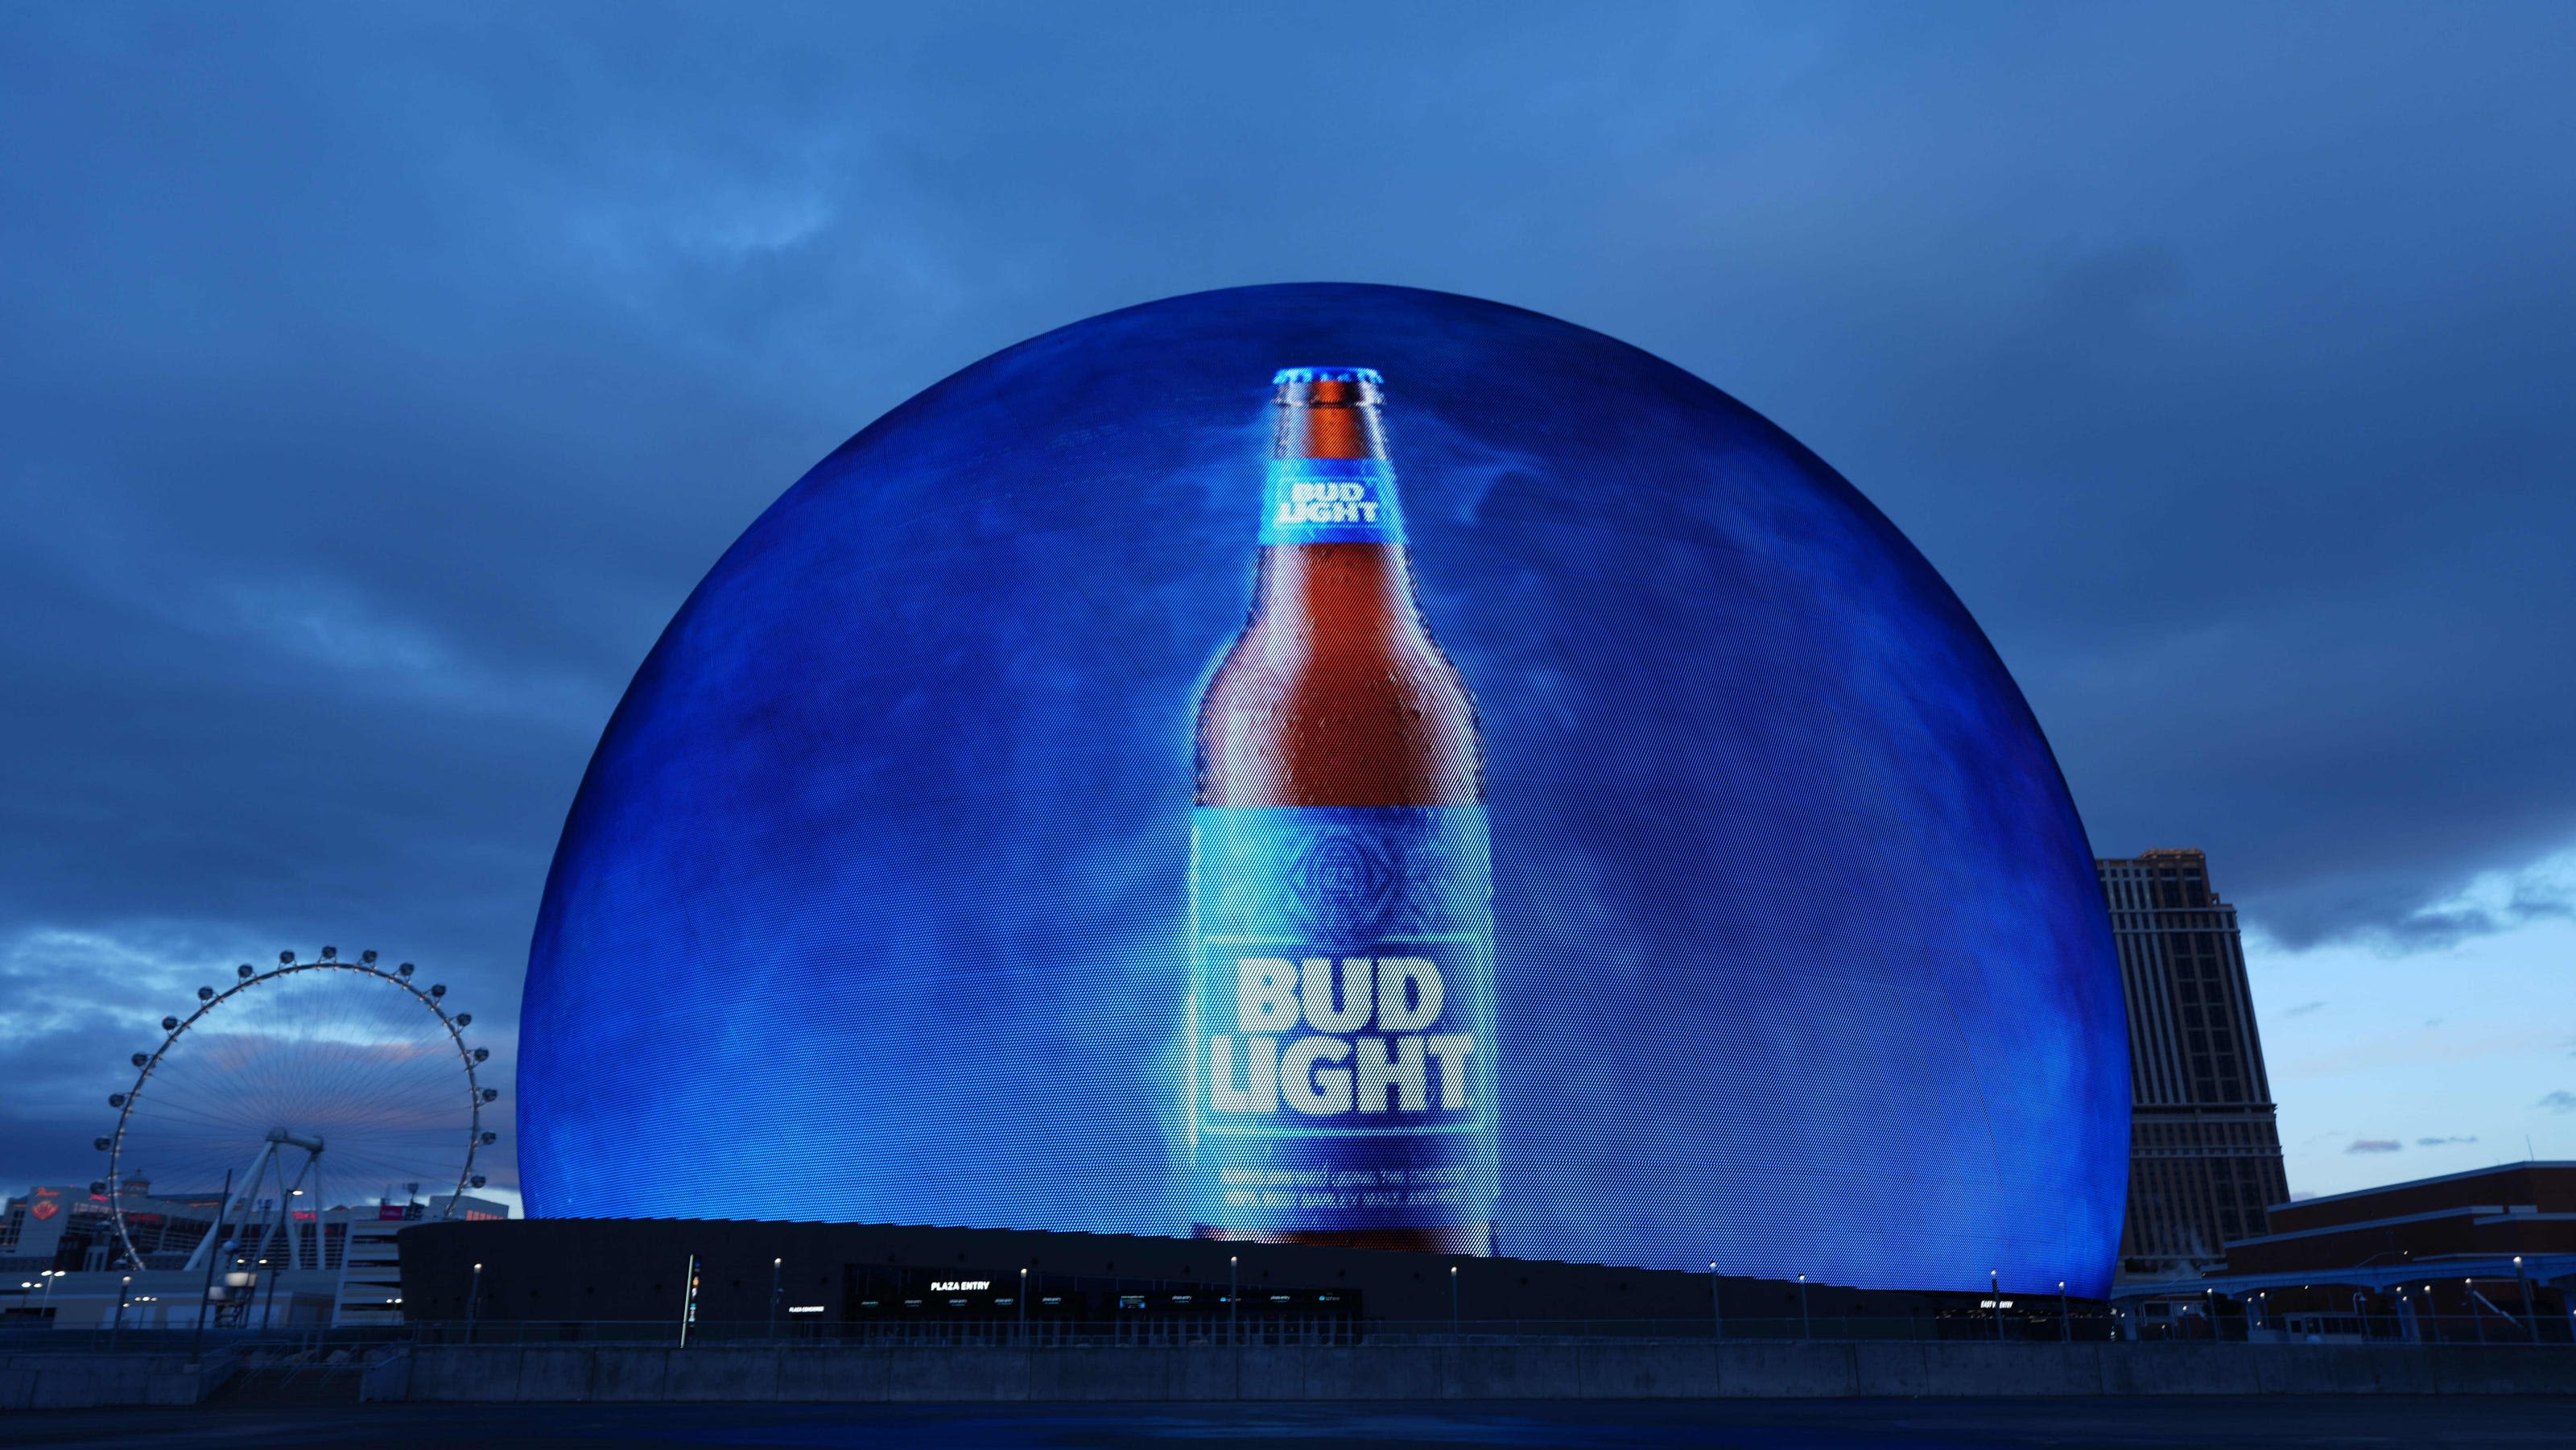 Has Bud Light survived the boycott? Year after influencer backlash, positive signs emerge